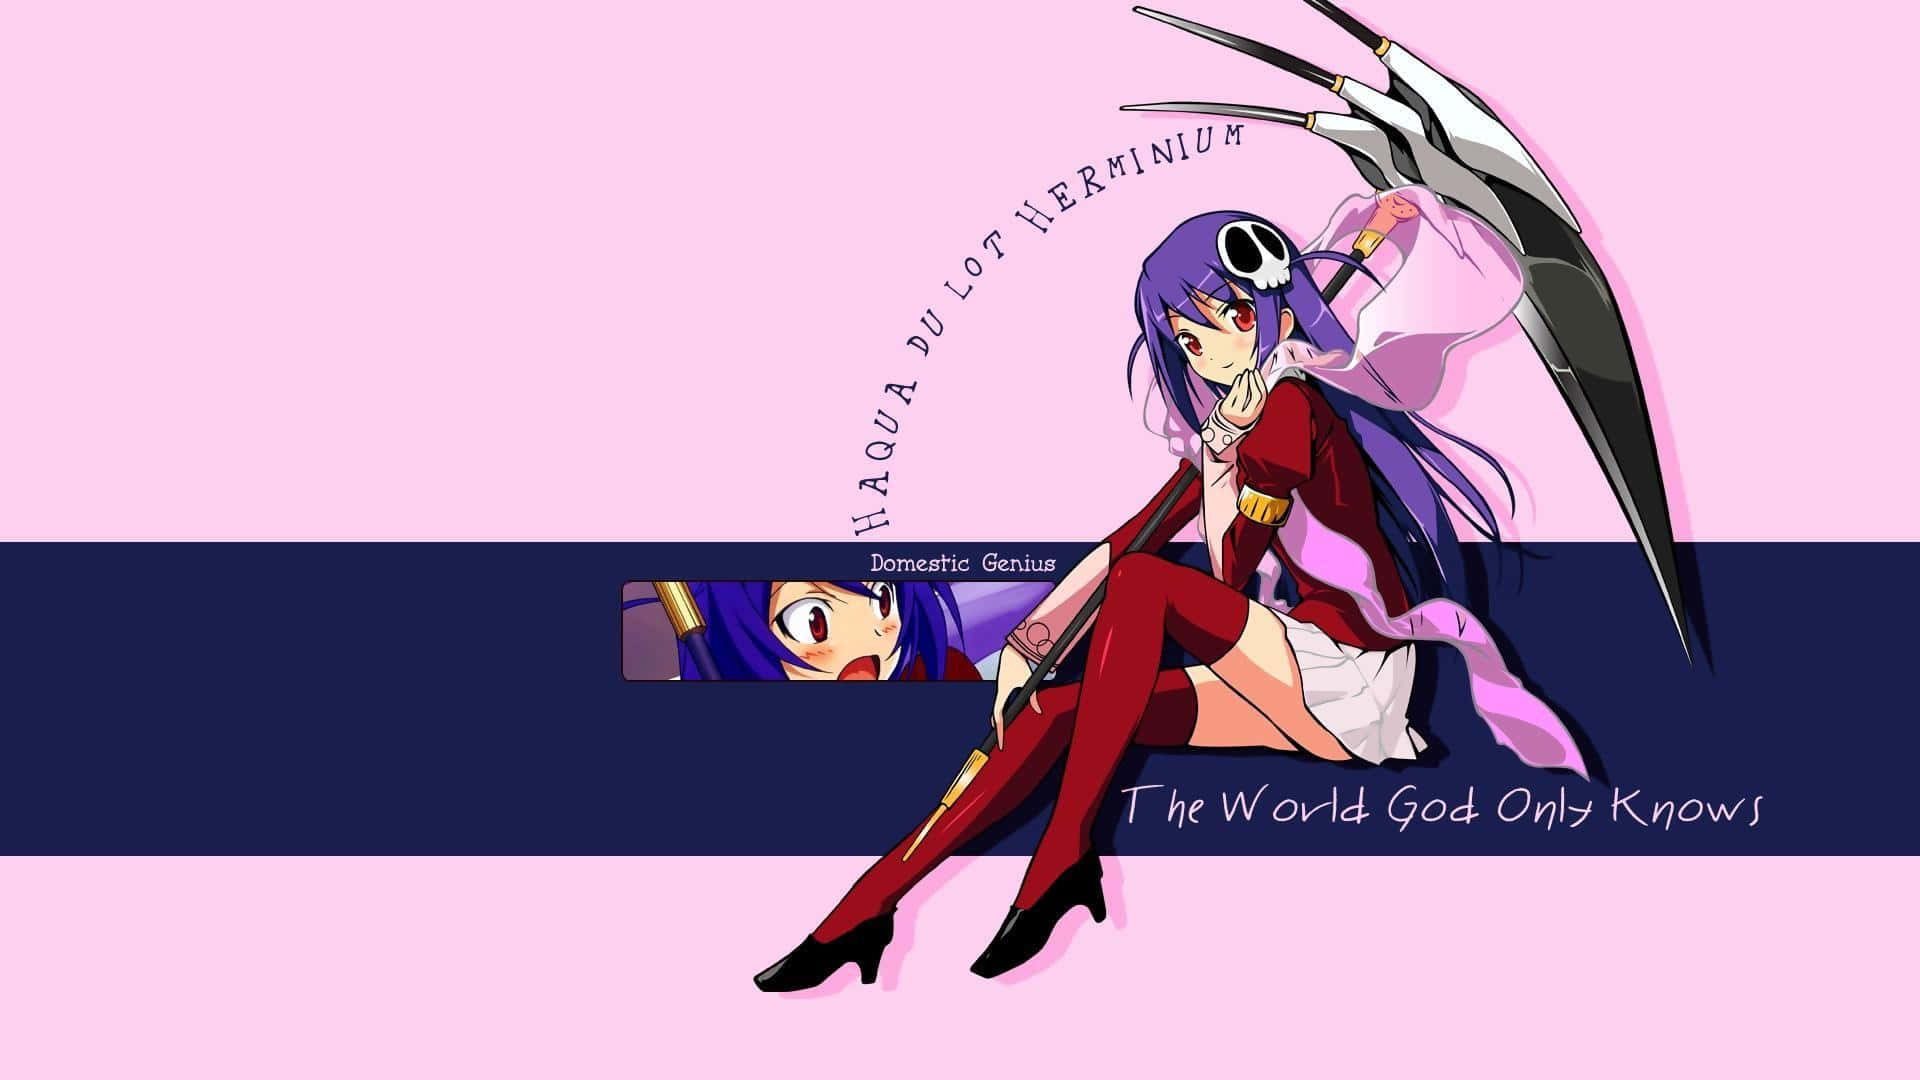 Magical Gaze - The World God Only Knows Anime Wallpaper